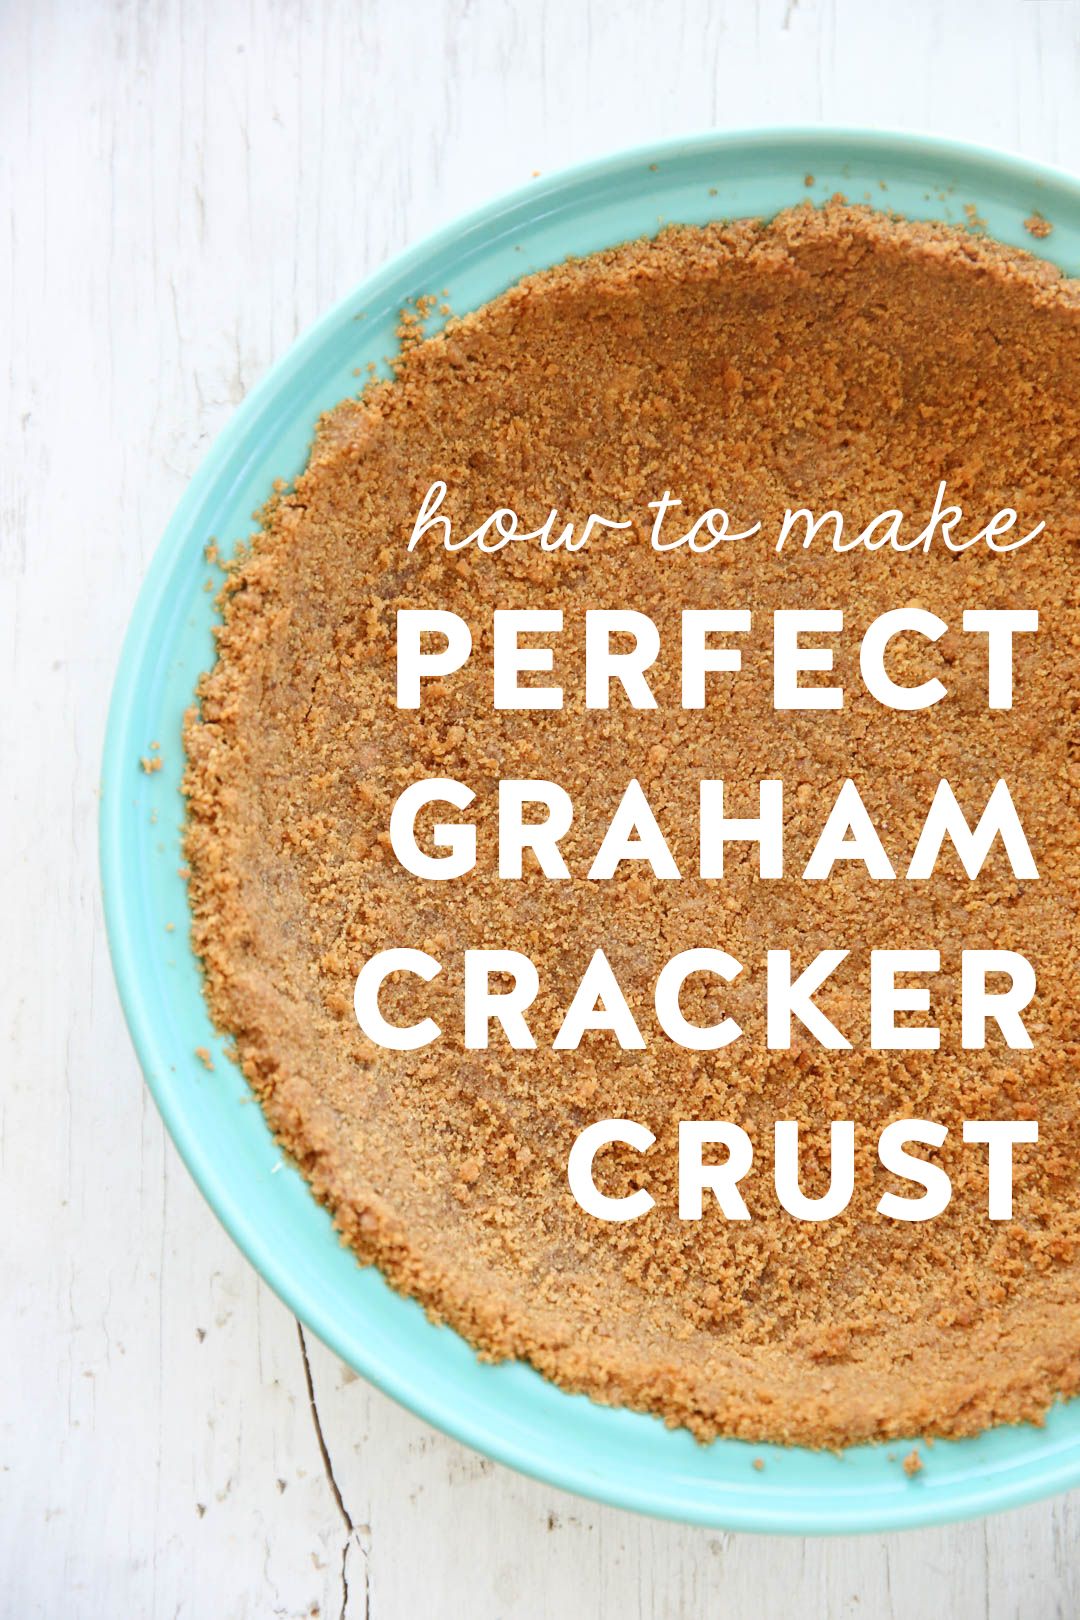 What To Fill Graham Cracker Crust With